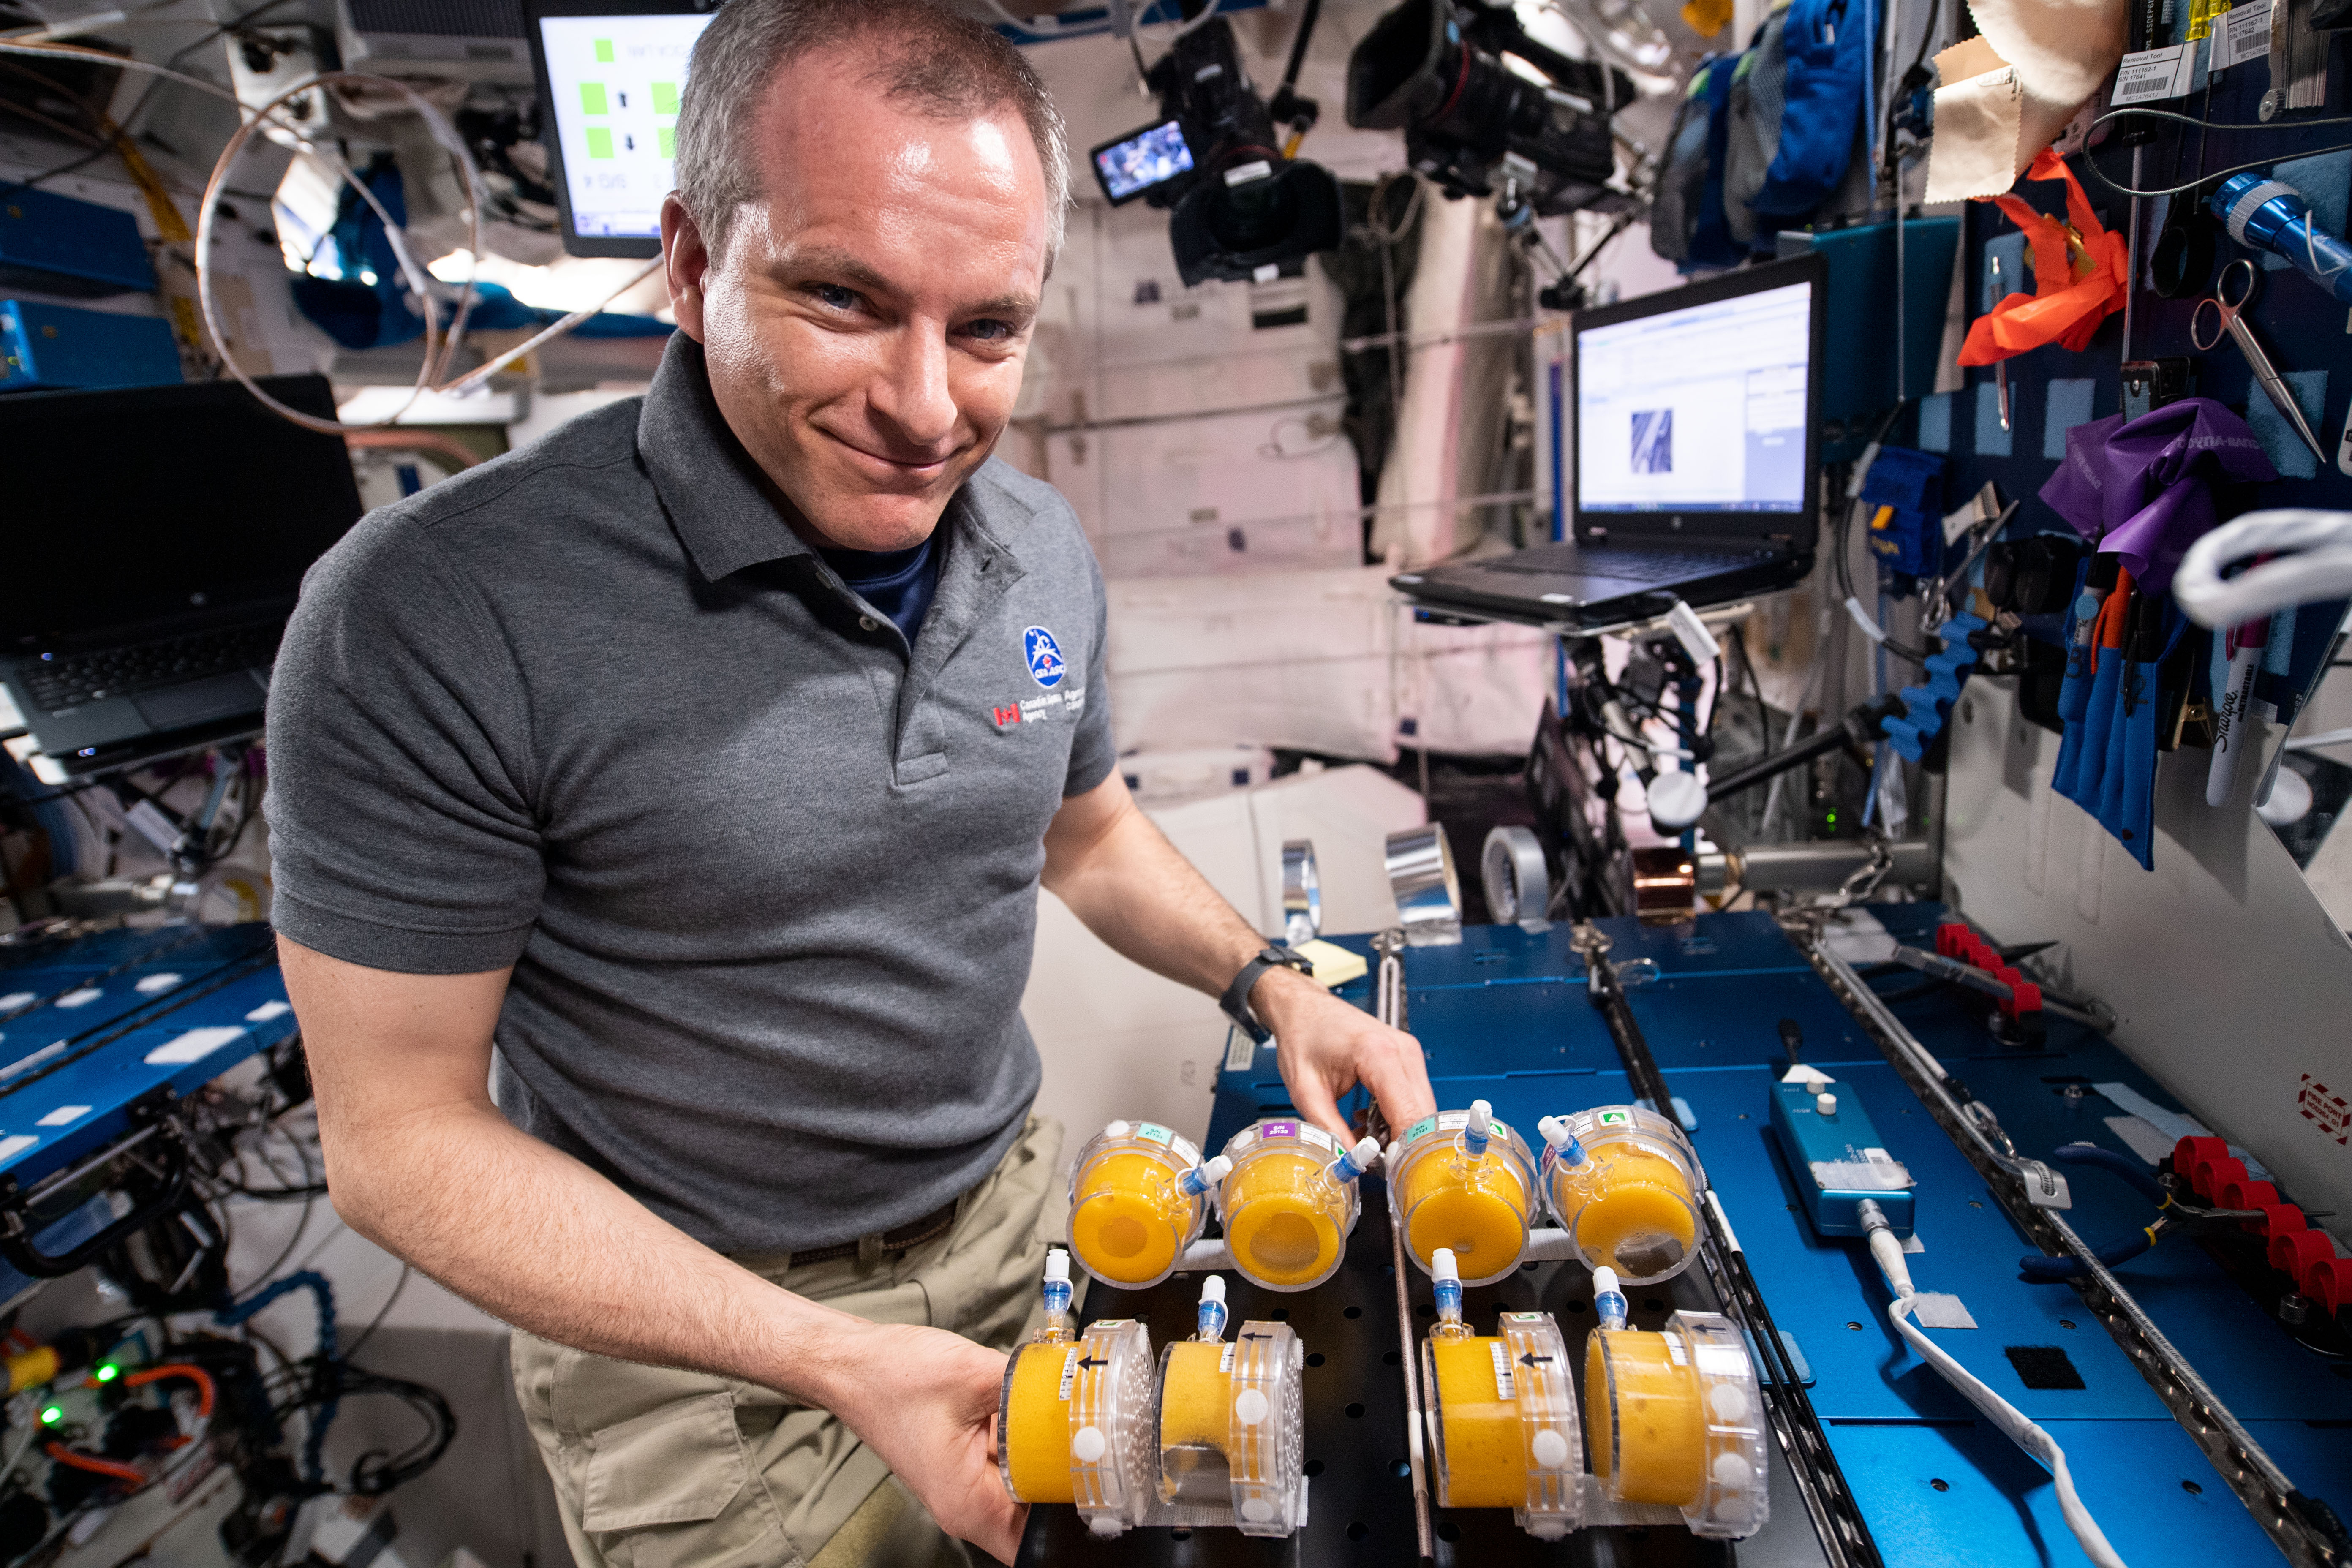 Man in dark gray shirt on the International Space Station stands in front of 8 dishes of dark orange colored engineered yeast samples.